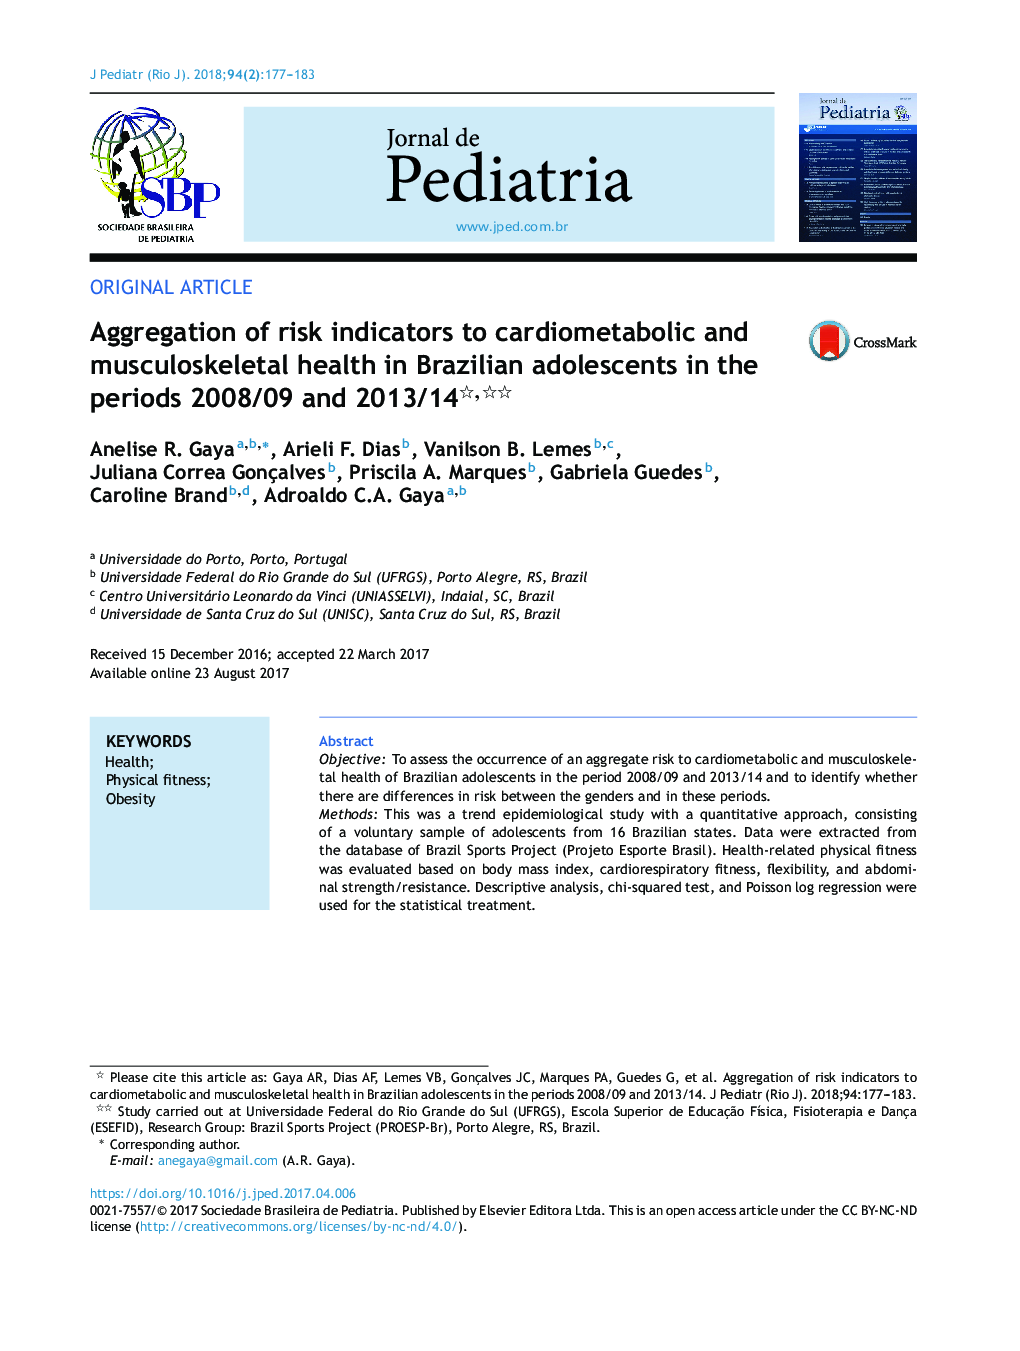 Aggregation of risk indicators to cardiometabolic and musculoskeletal health in Brazilian adolescents in the periods 2008/09 and 2013/14